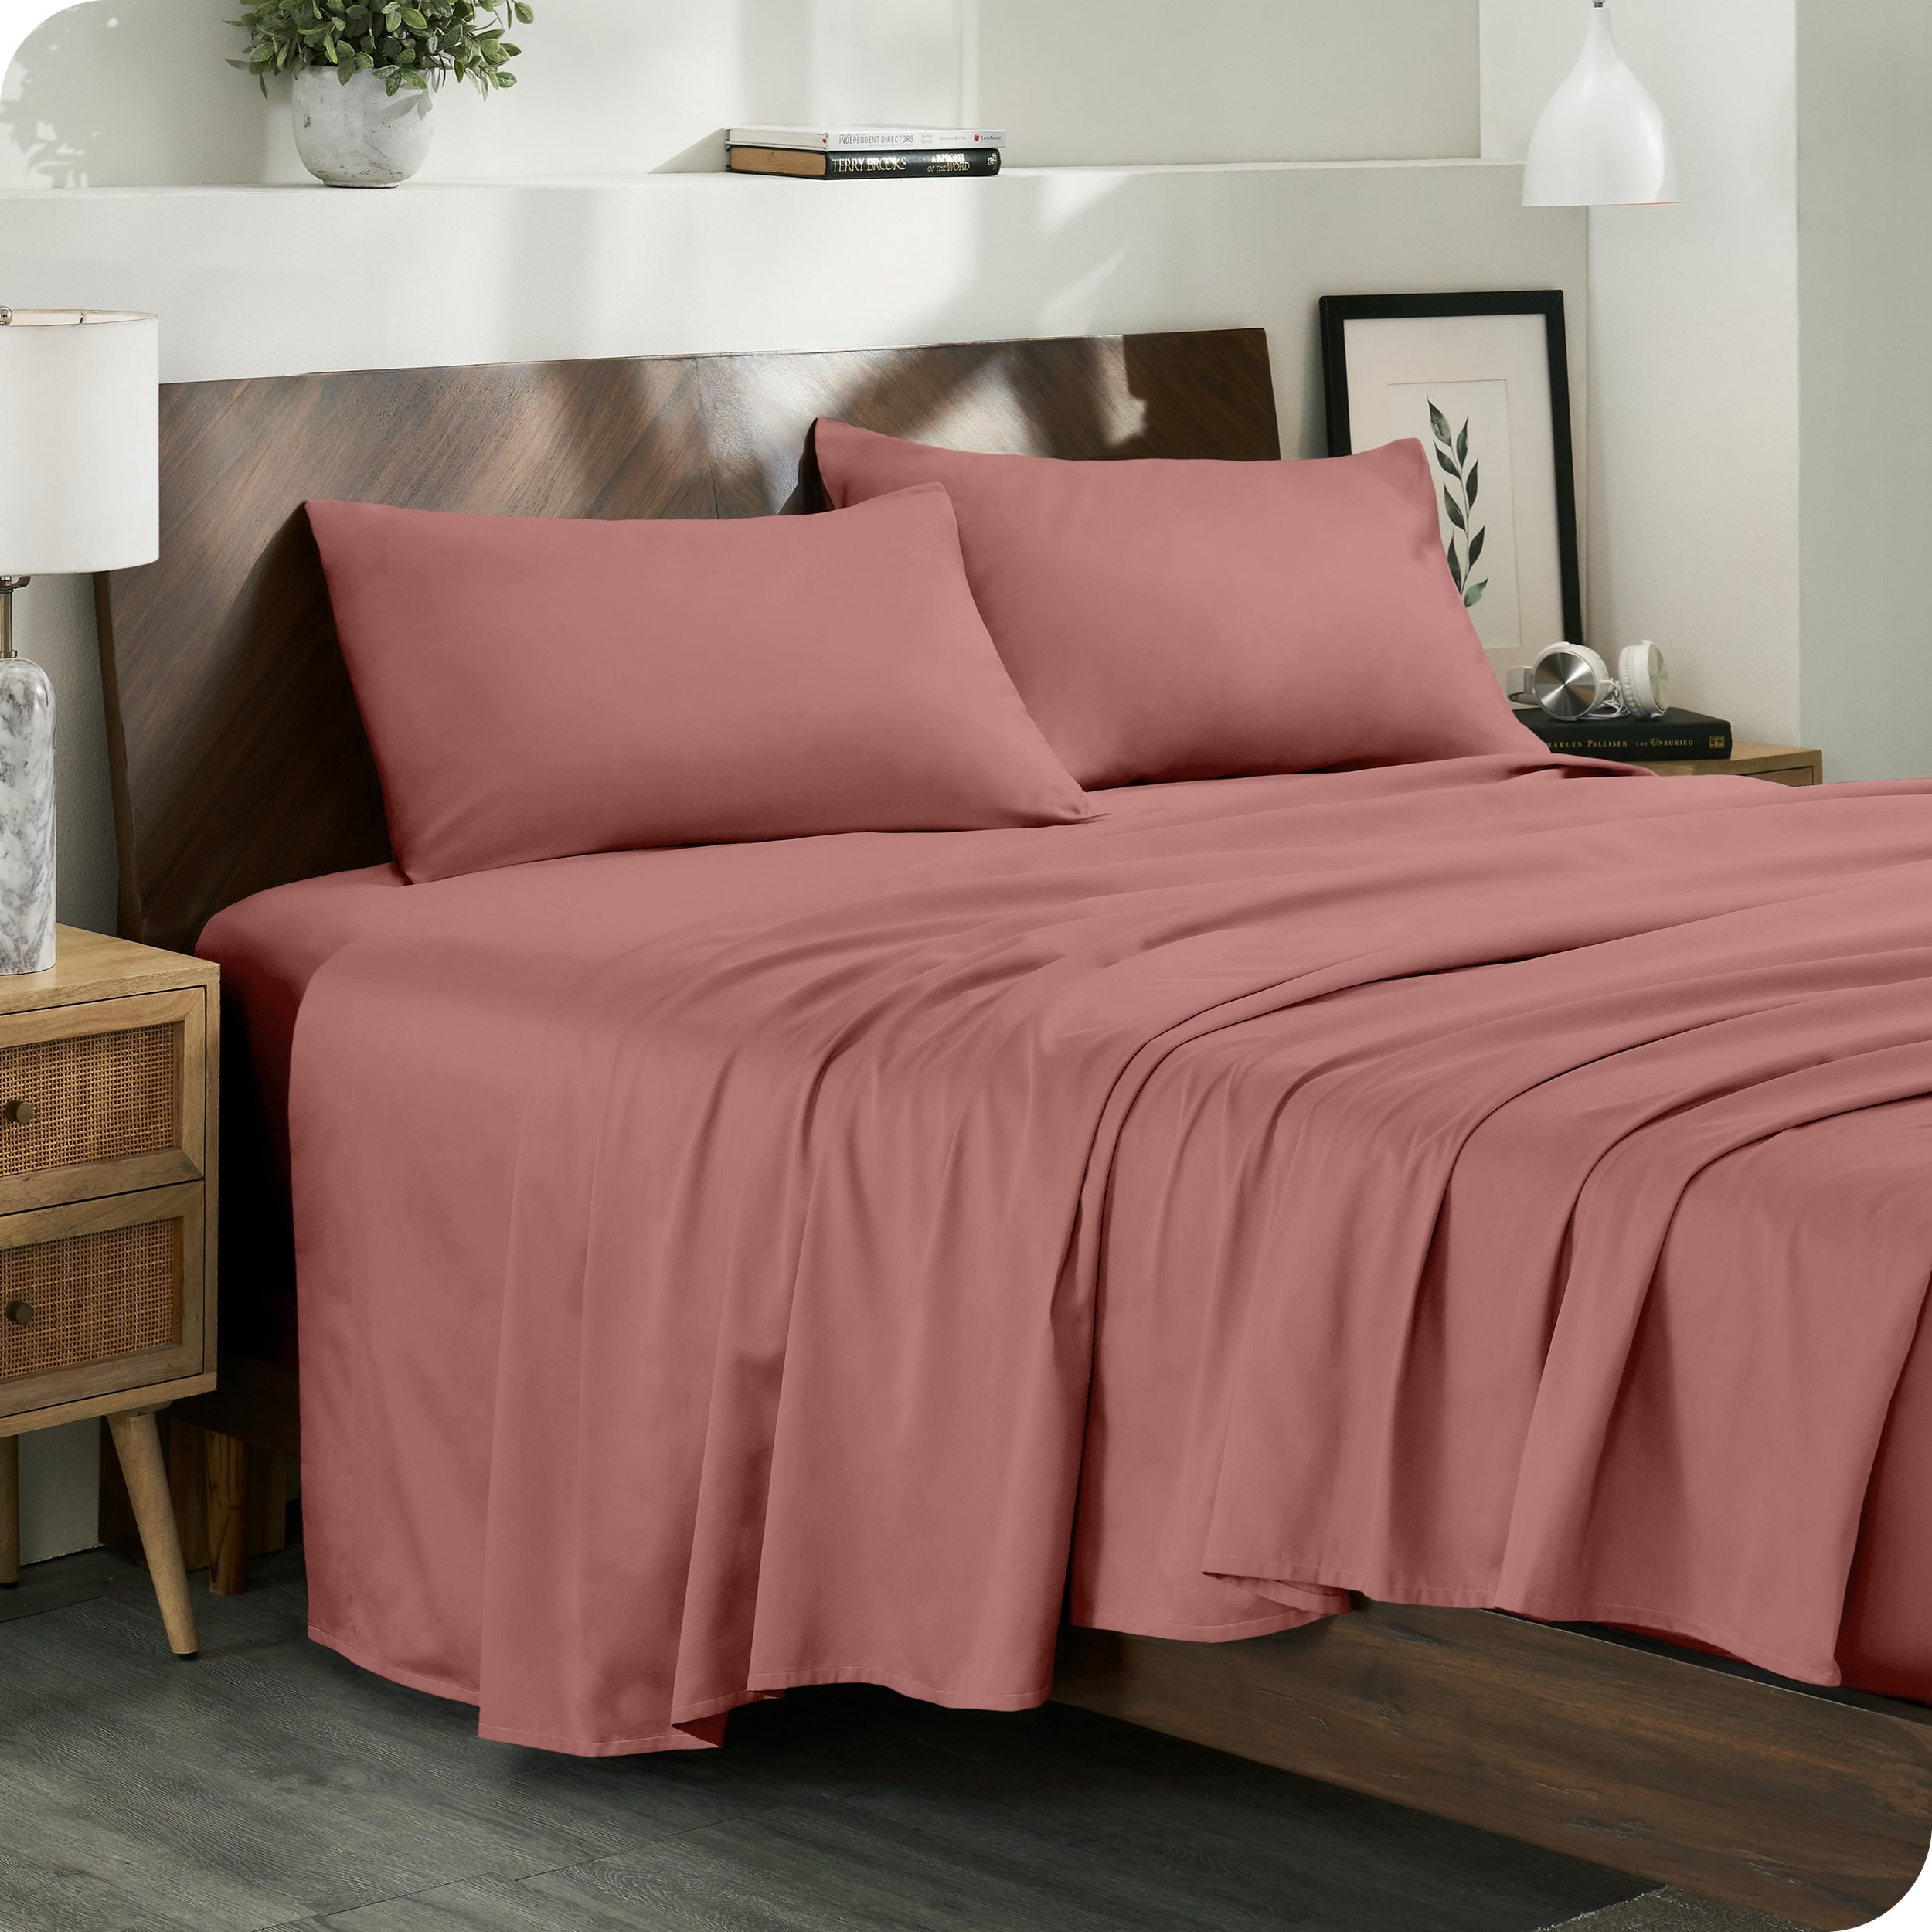 https://ak1.ostkcdn.com/images/products/is/images/direct/937a469456a04b348145b032213ac7af5d360f78/Bare-Home-Organic-Cotton-Sheet-Set---Silky-Smooth-Sateen-Weave.jpg